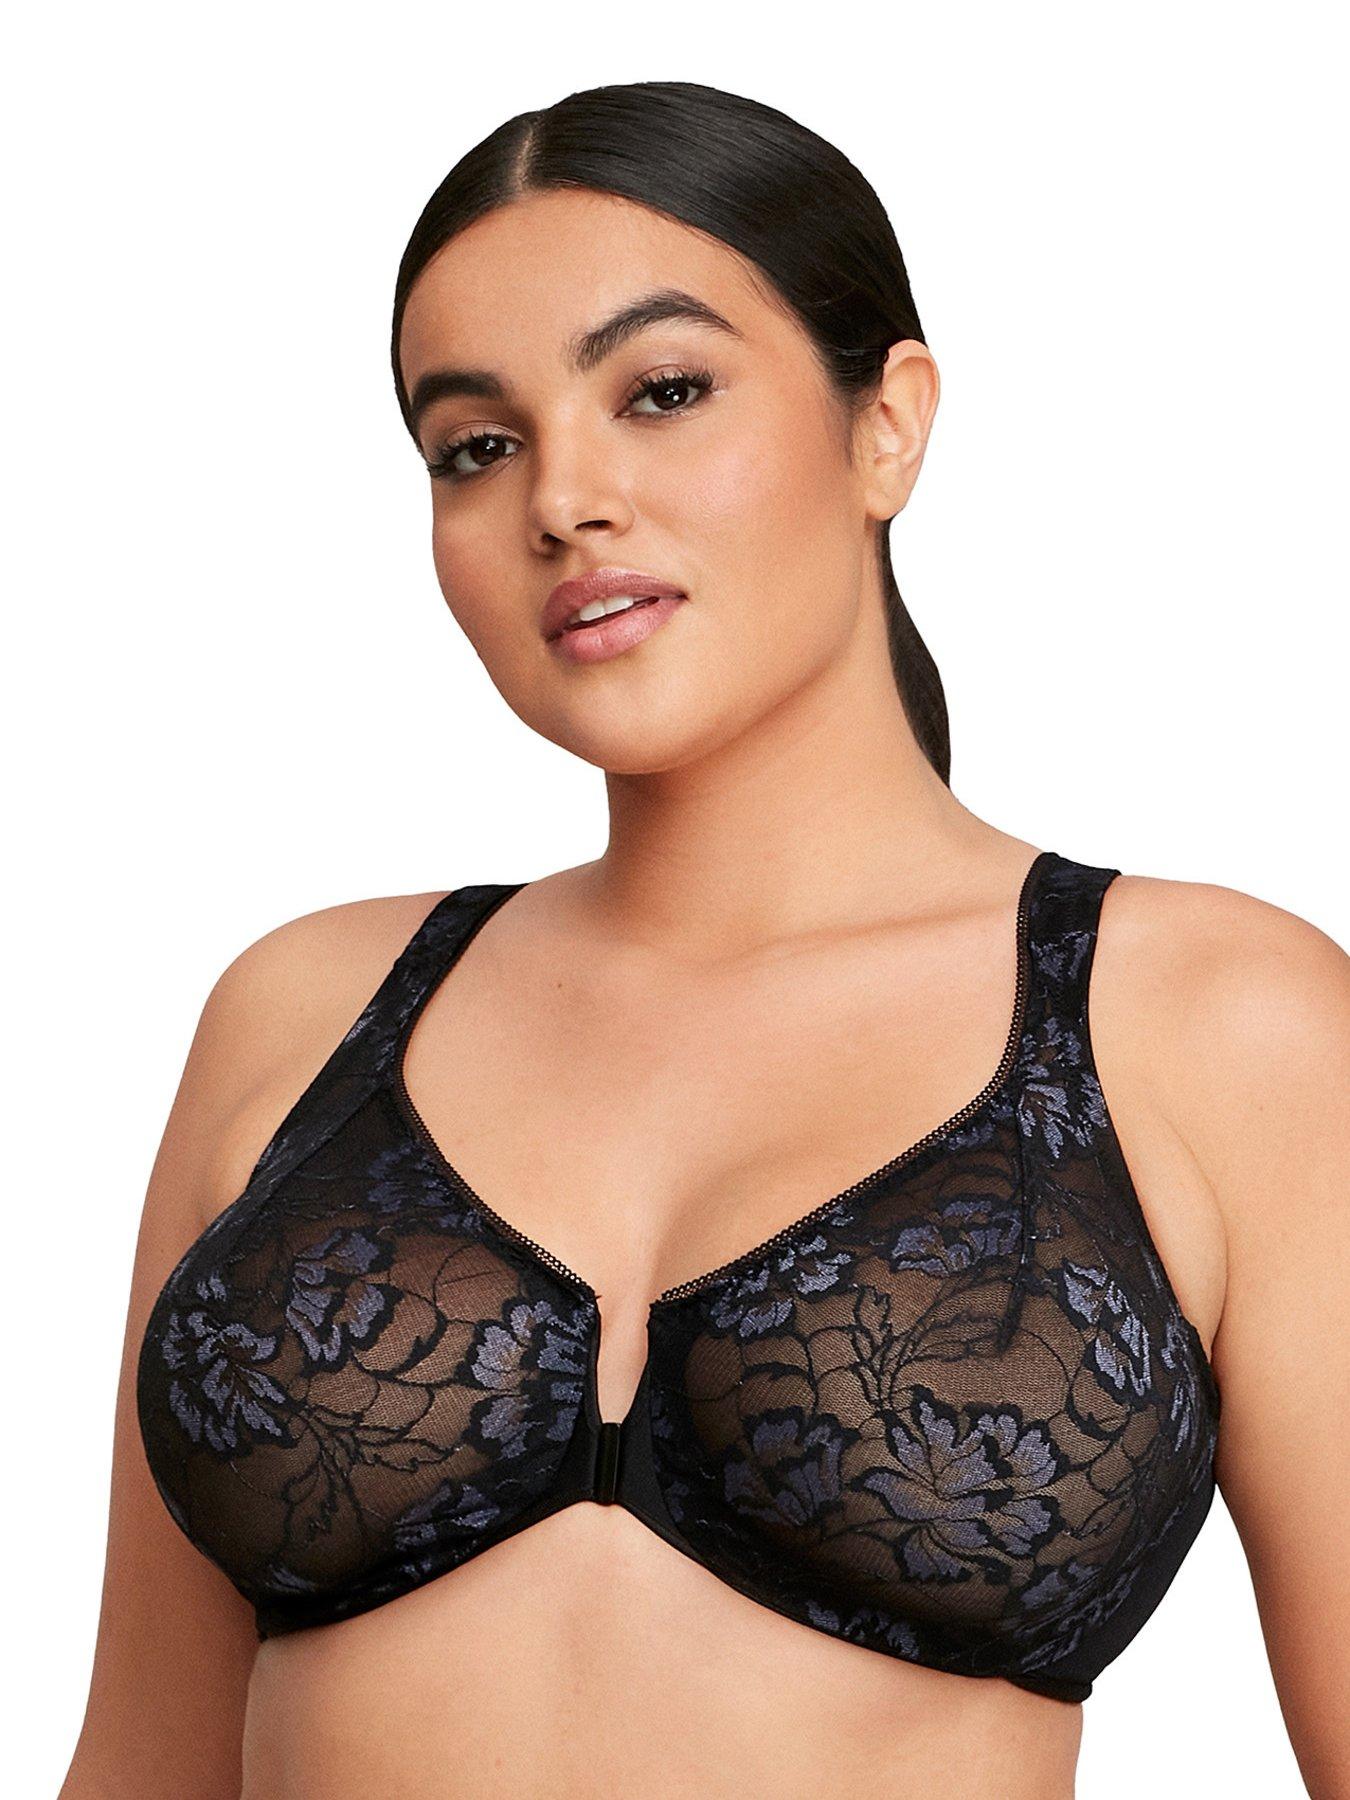 Superfit Lace Padded Strapless Bra - Black/Nude